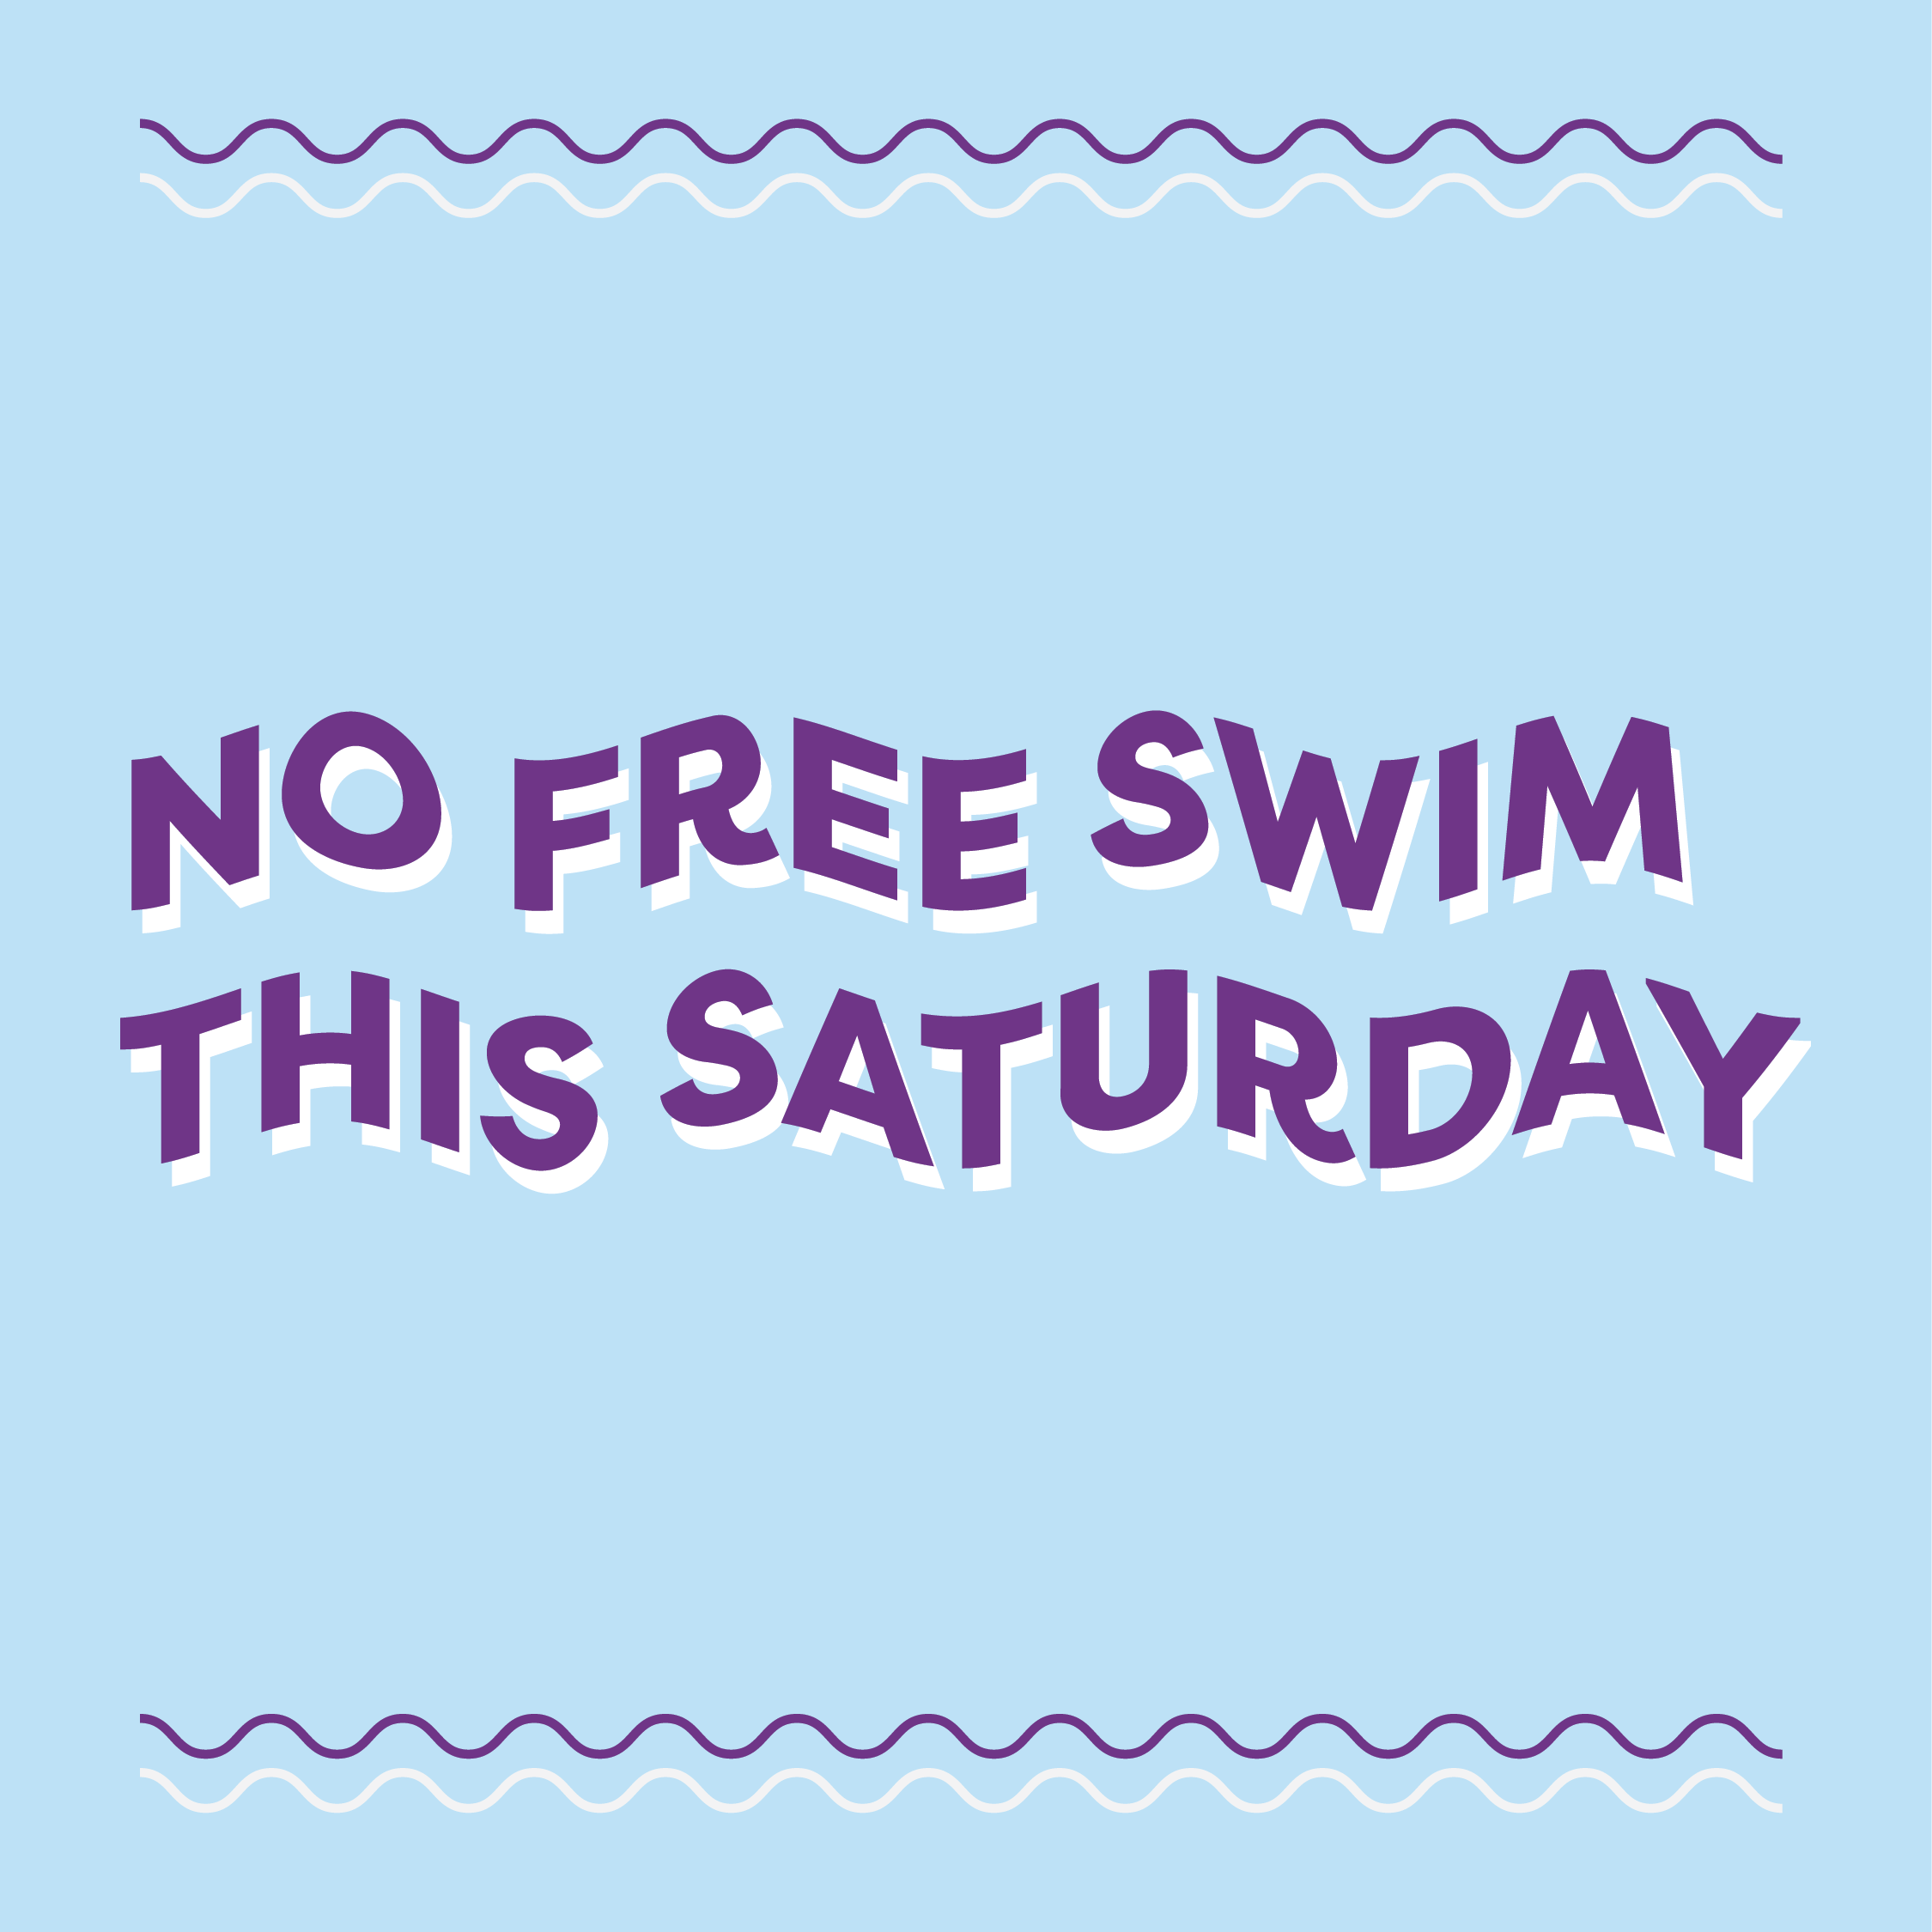 Text says "NO FREE SWIM THIS SATURDAY" in a wavy font. The background is light blue and the text is a dark purple